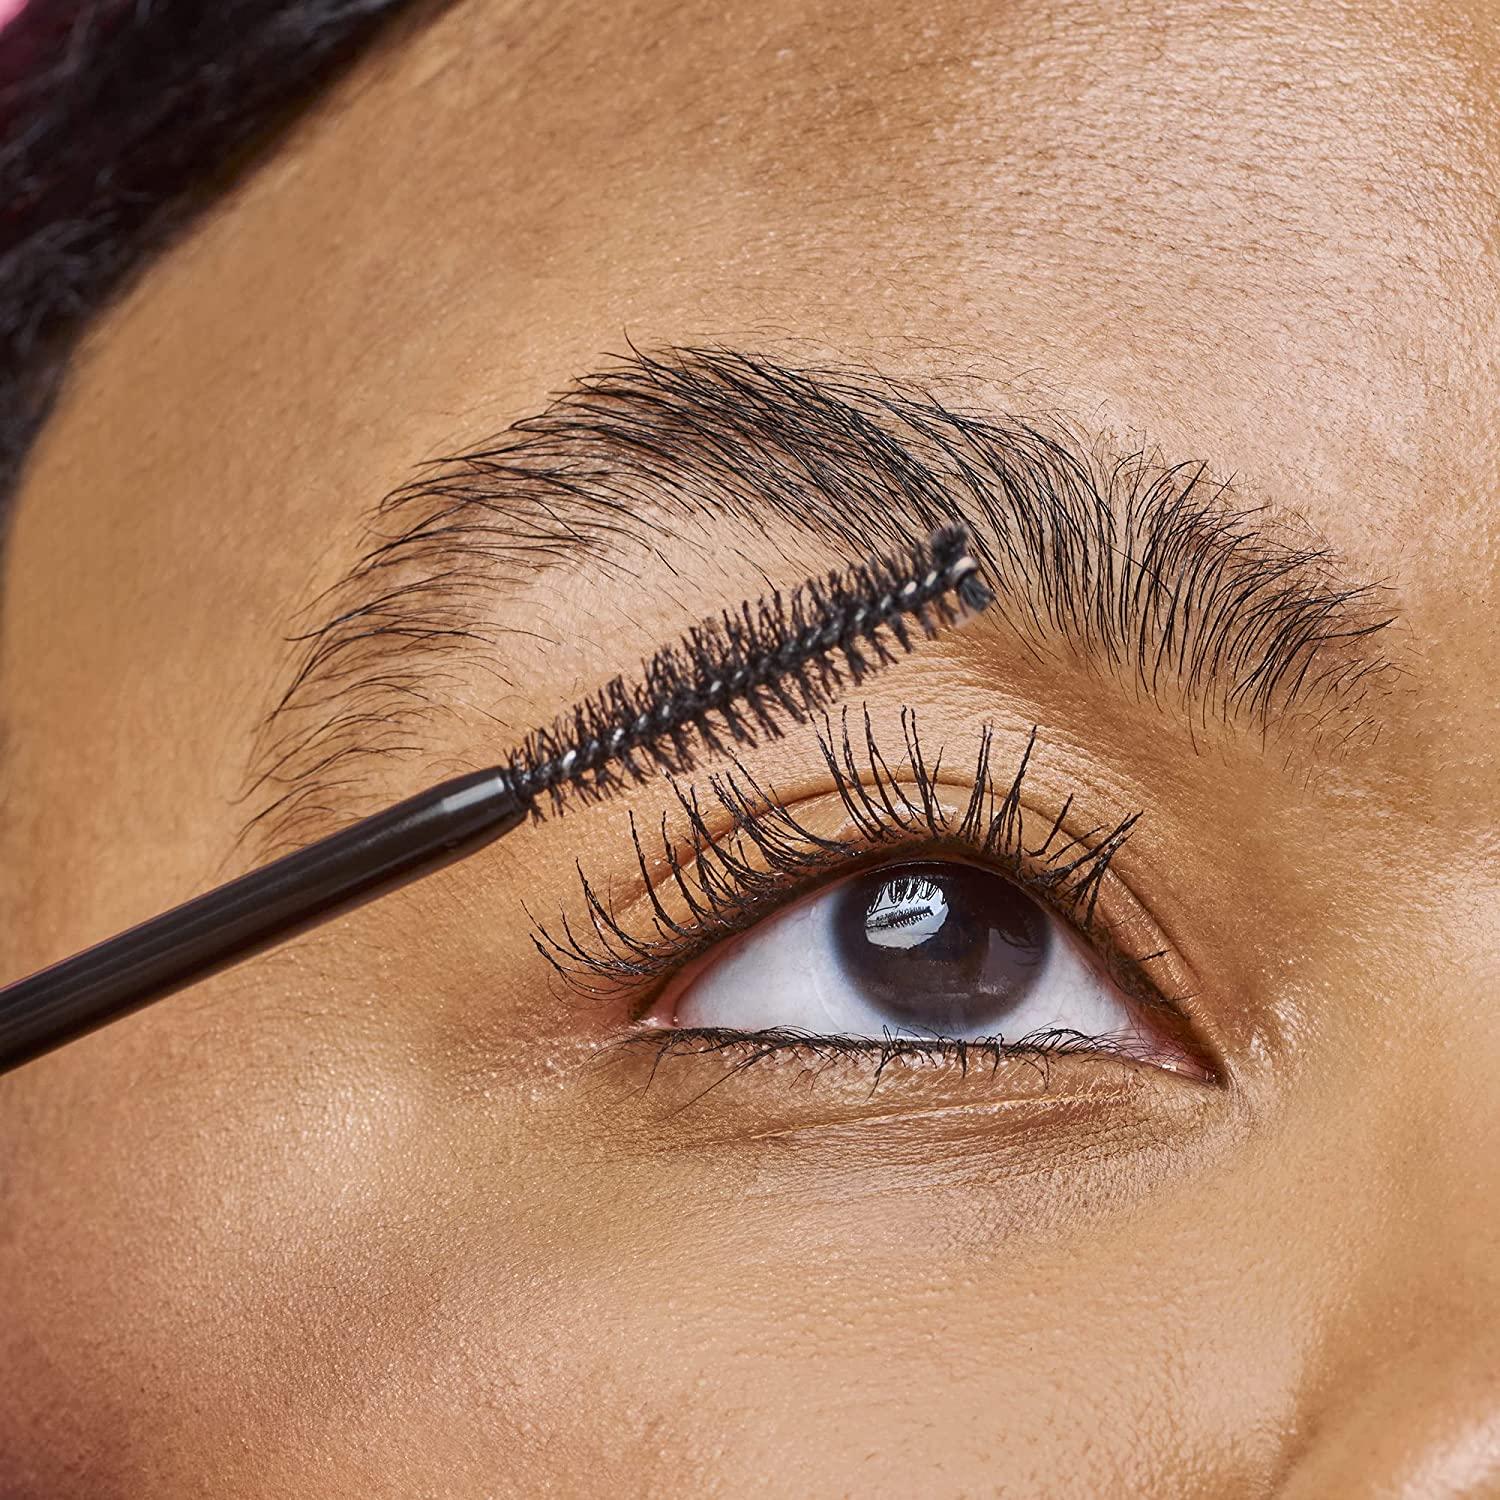 essence | Fake! Fiber Mascara (Pack (Pack | | Volumizing Free Count 1) & Free of the What Cruelty 1 Lengthening of 1) Paraben